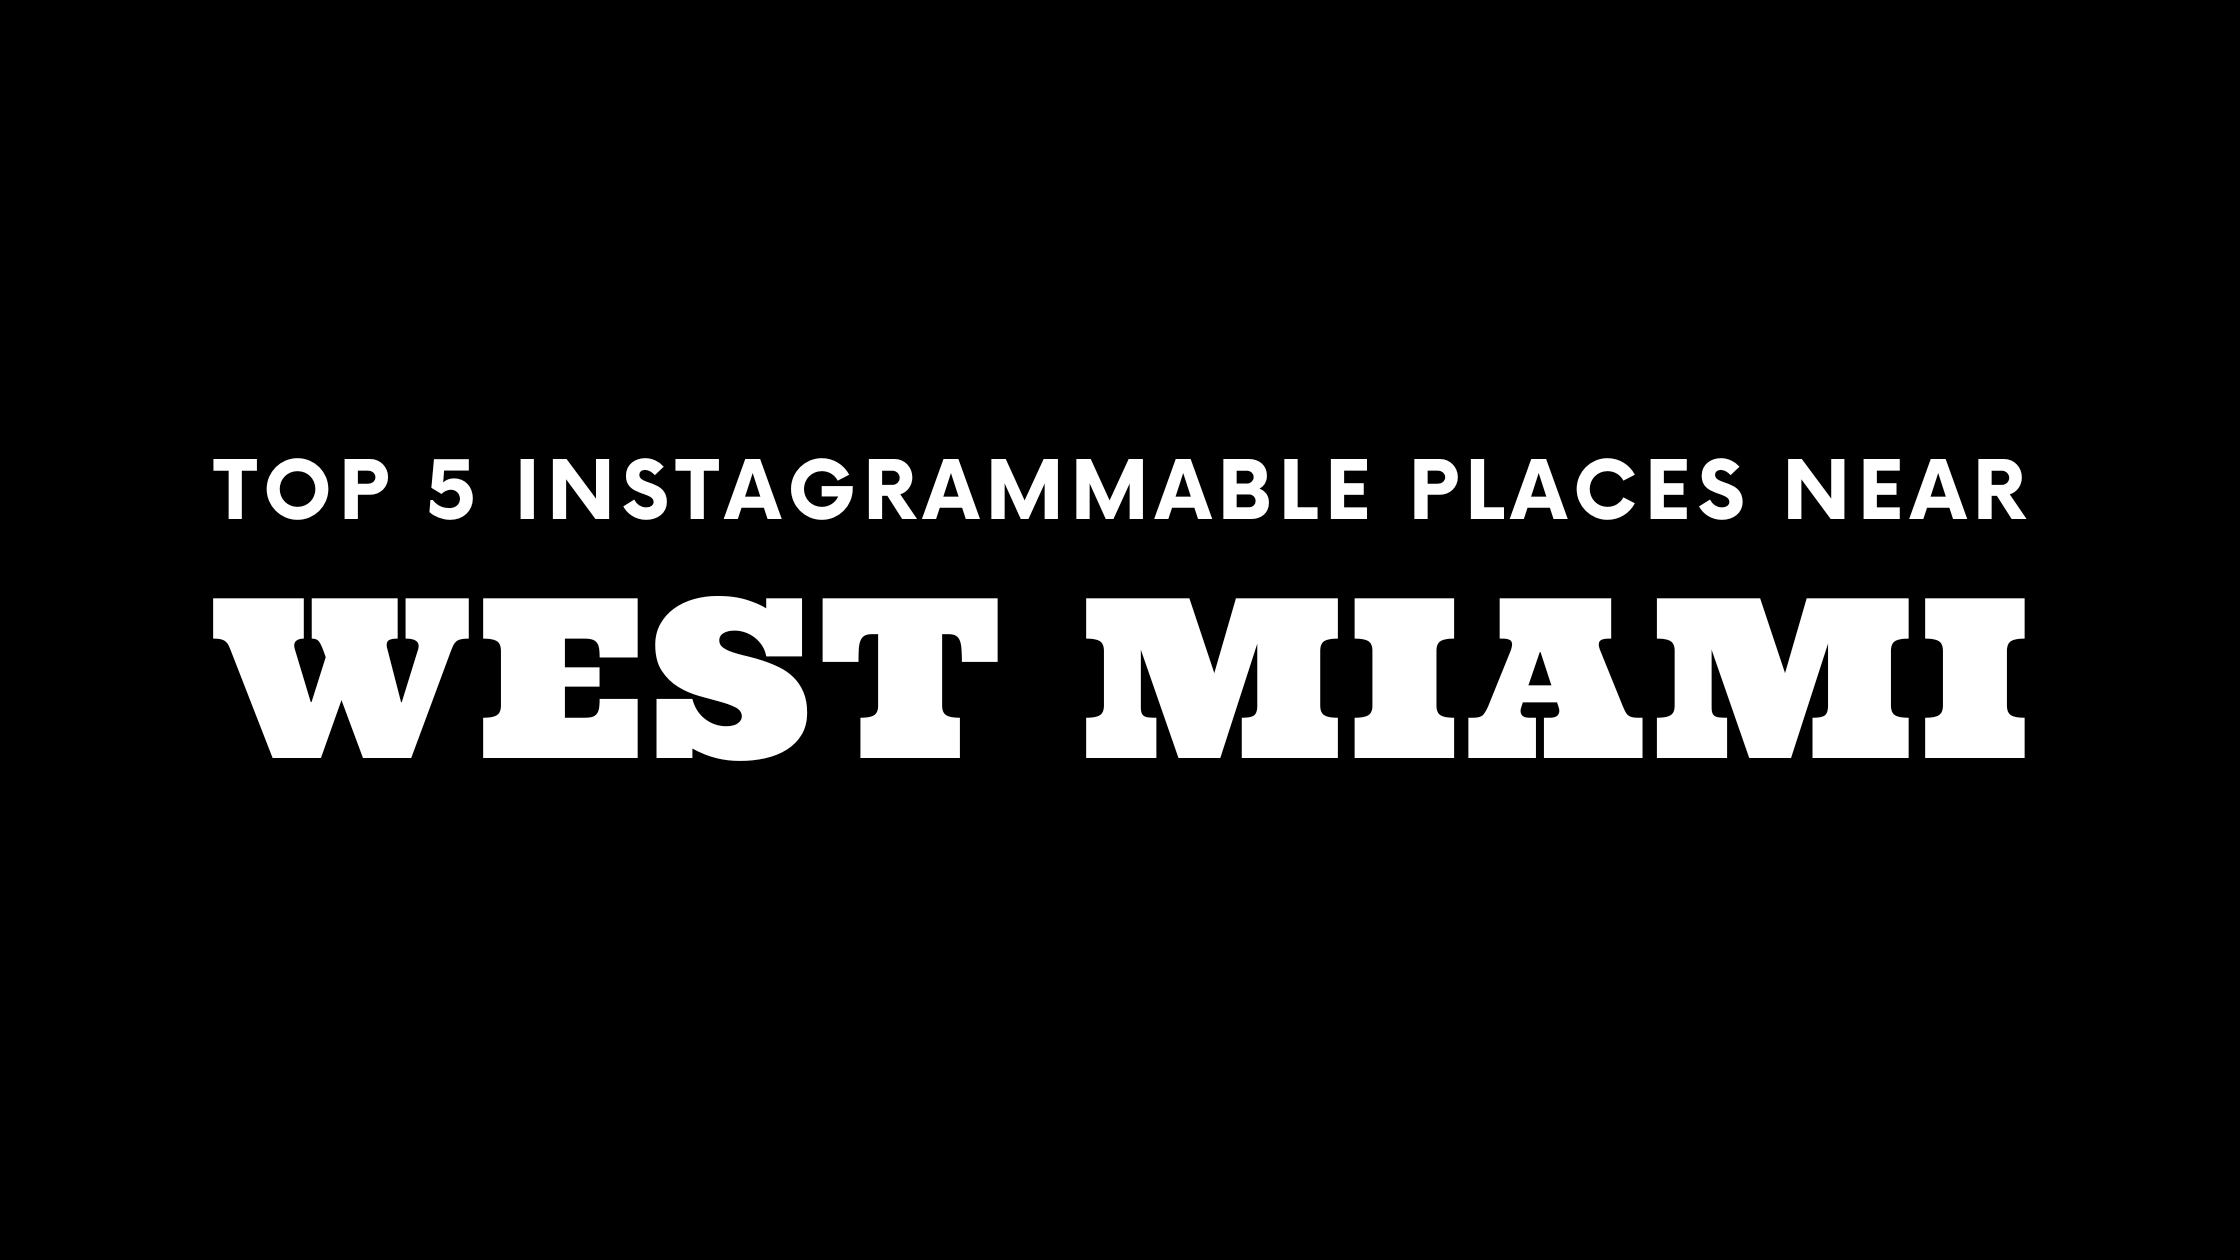 Top 5 Instagrammable Places Near West Miami